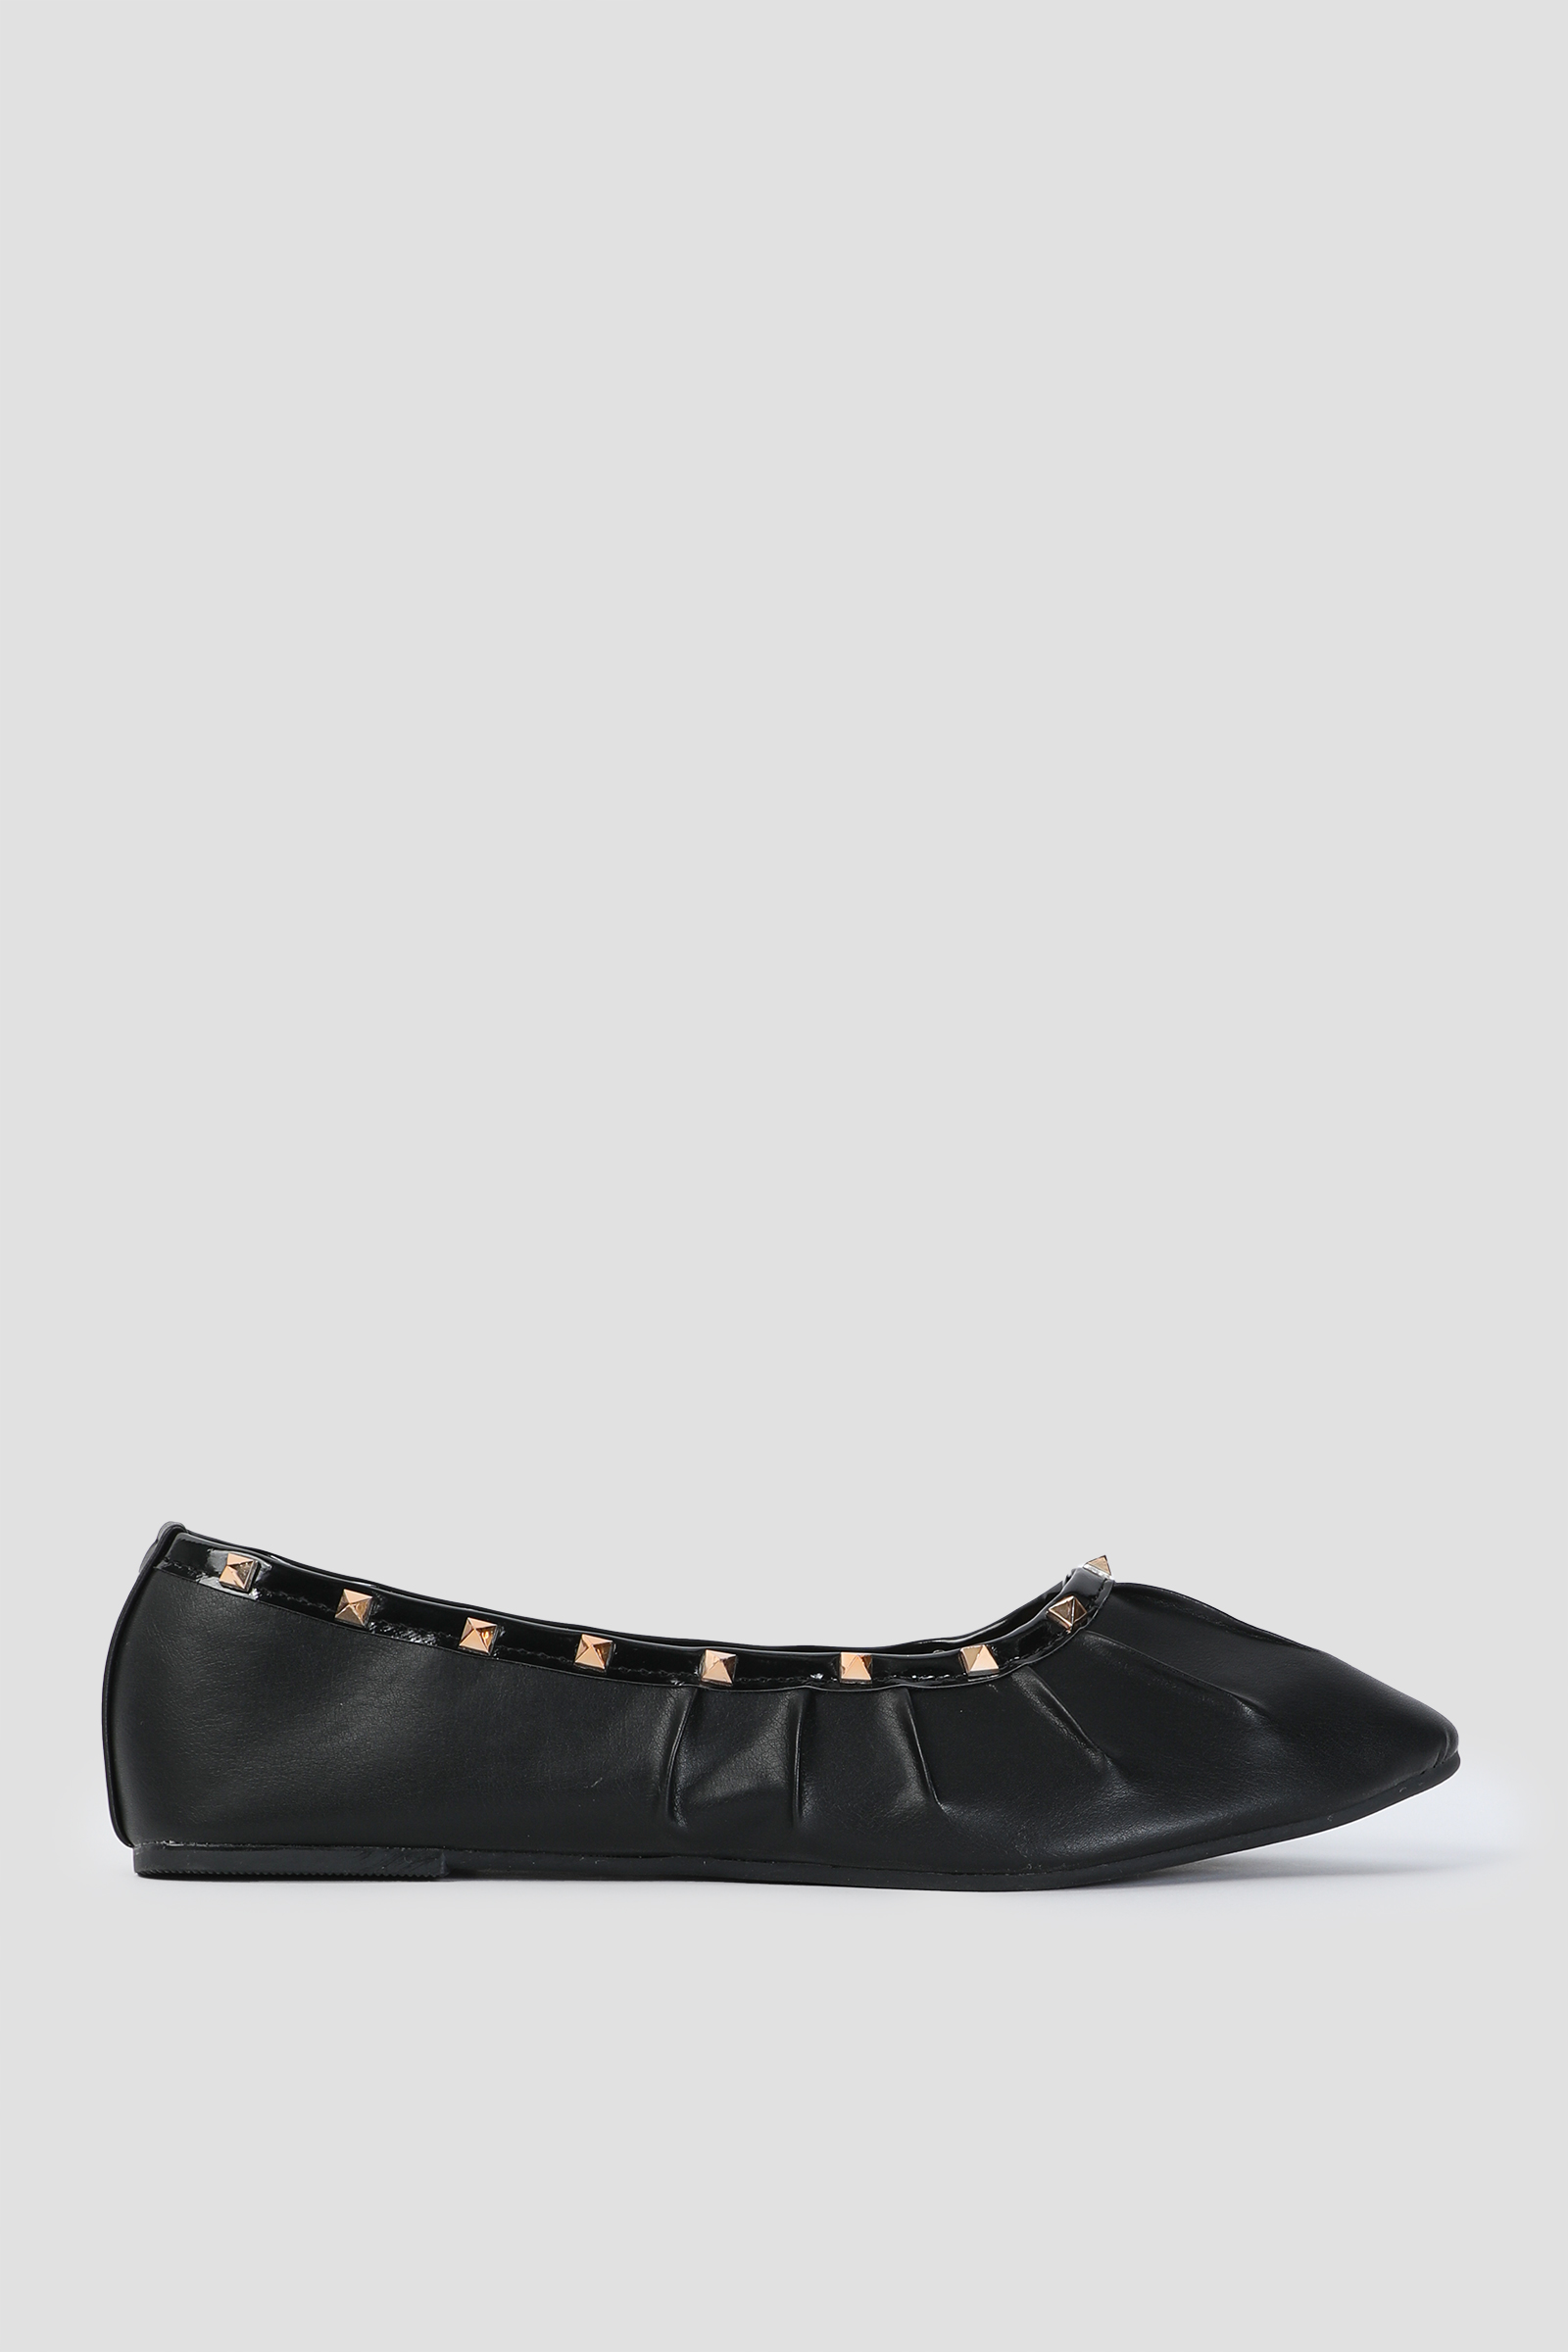 Ardene Pleated Flats with Stud Details in Black | Size | Faux Leather/Rubber